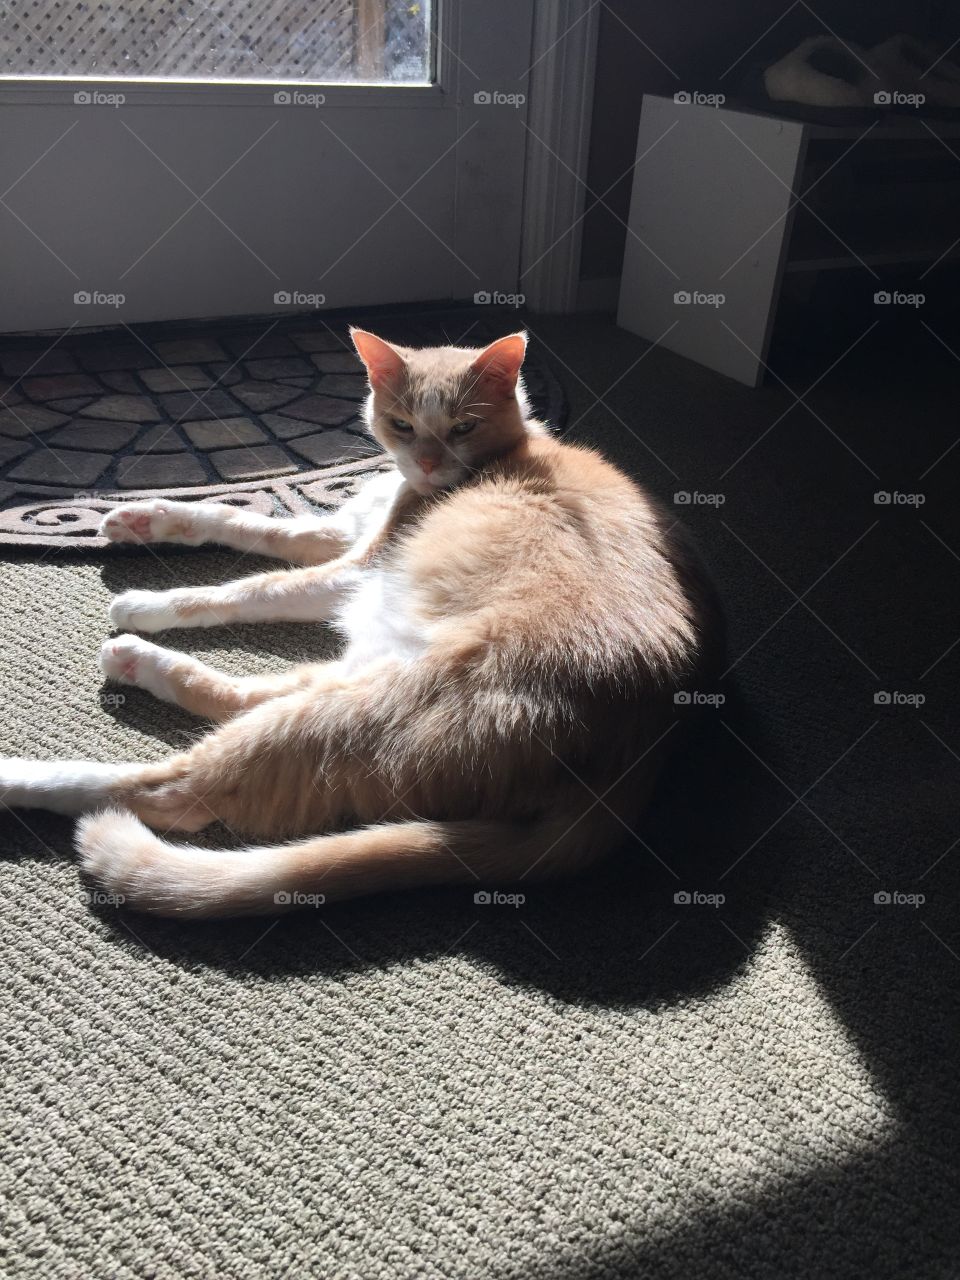 Resting in the sun after a long day of nothing. 